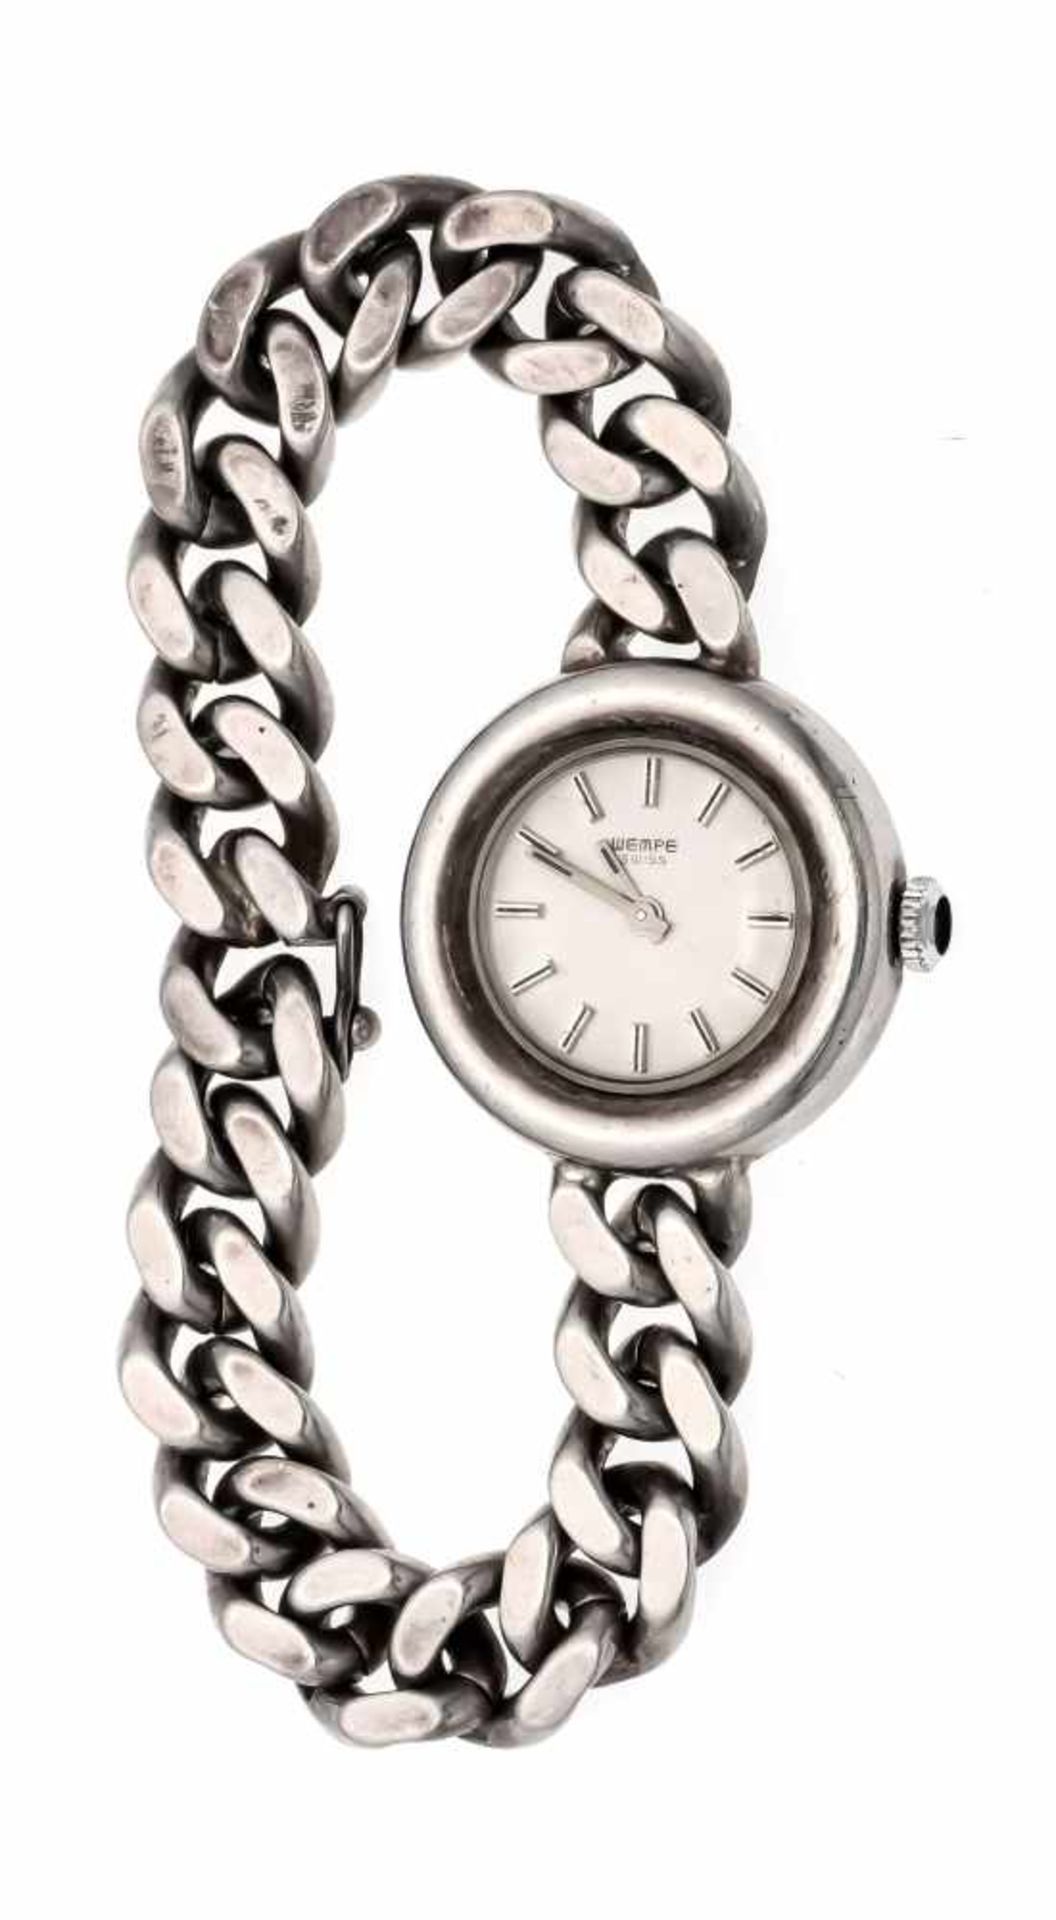 Women's wristwatch Wempe, hand-wound, silver 835 with chain bracelet, silver-colored. Dial